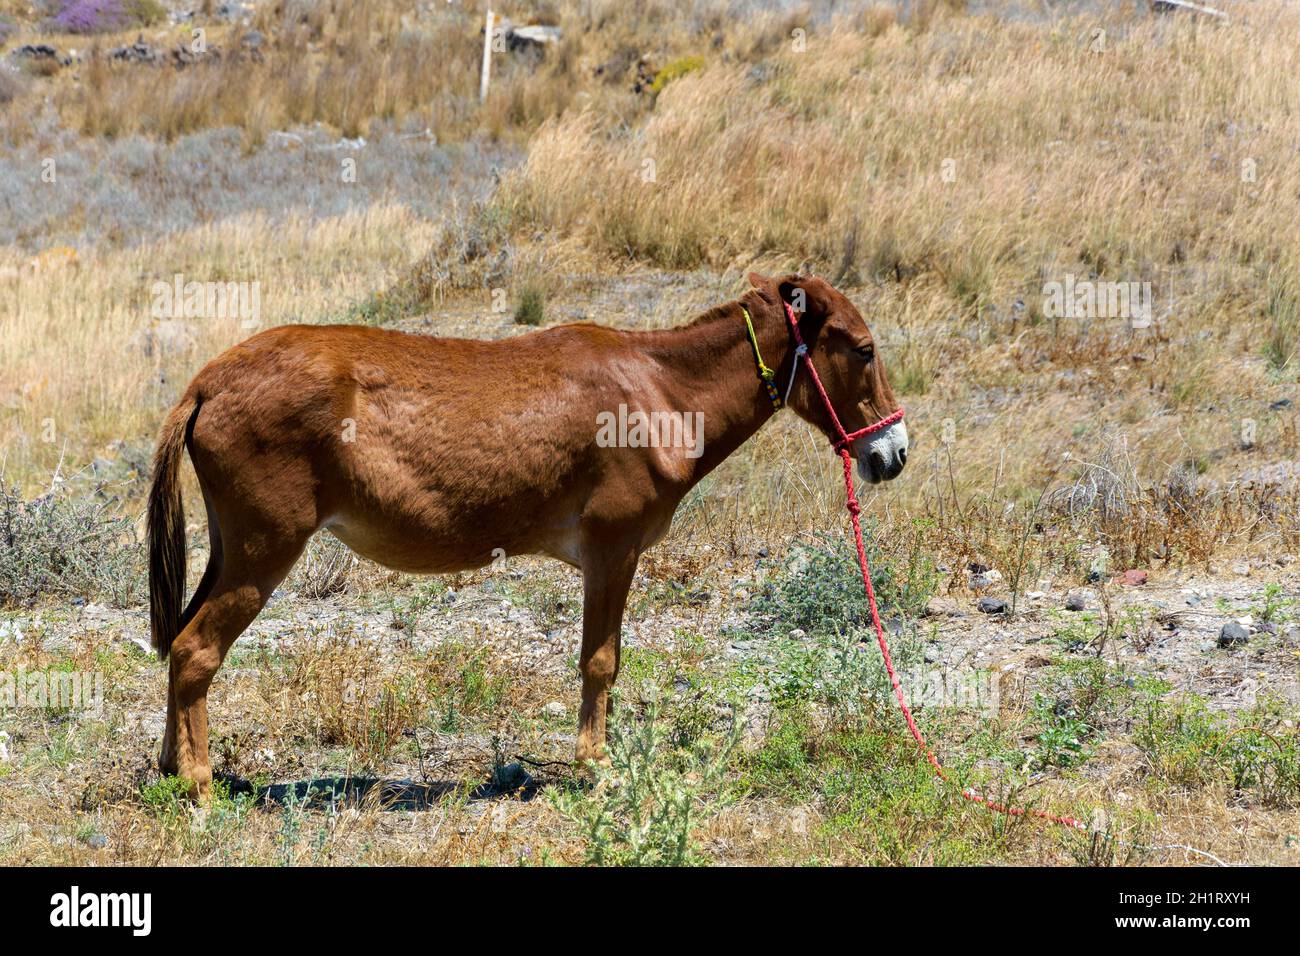 A brown donkey tied in a field, Greece Stock Photo